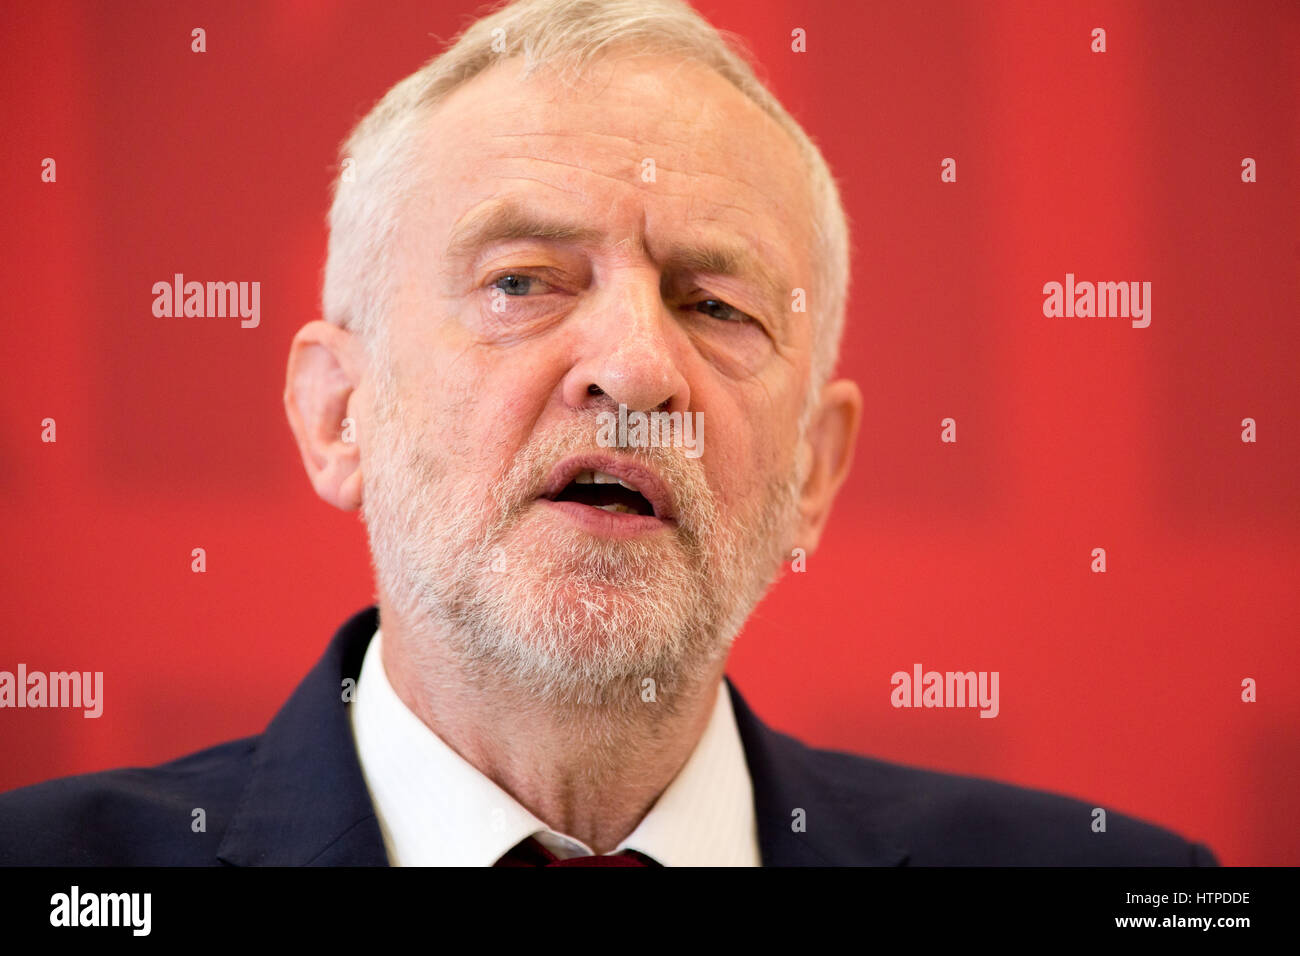 Labour Leader Jeremy Corbyn speaking at a Local Labour meeting held at Warwick University Stock Photo